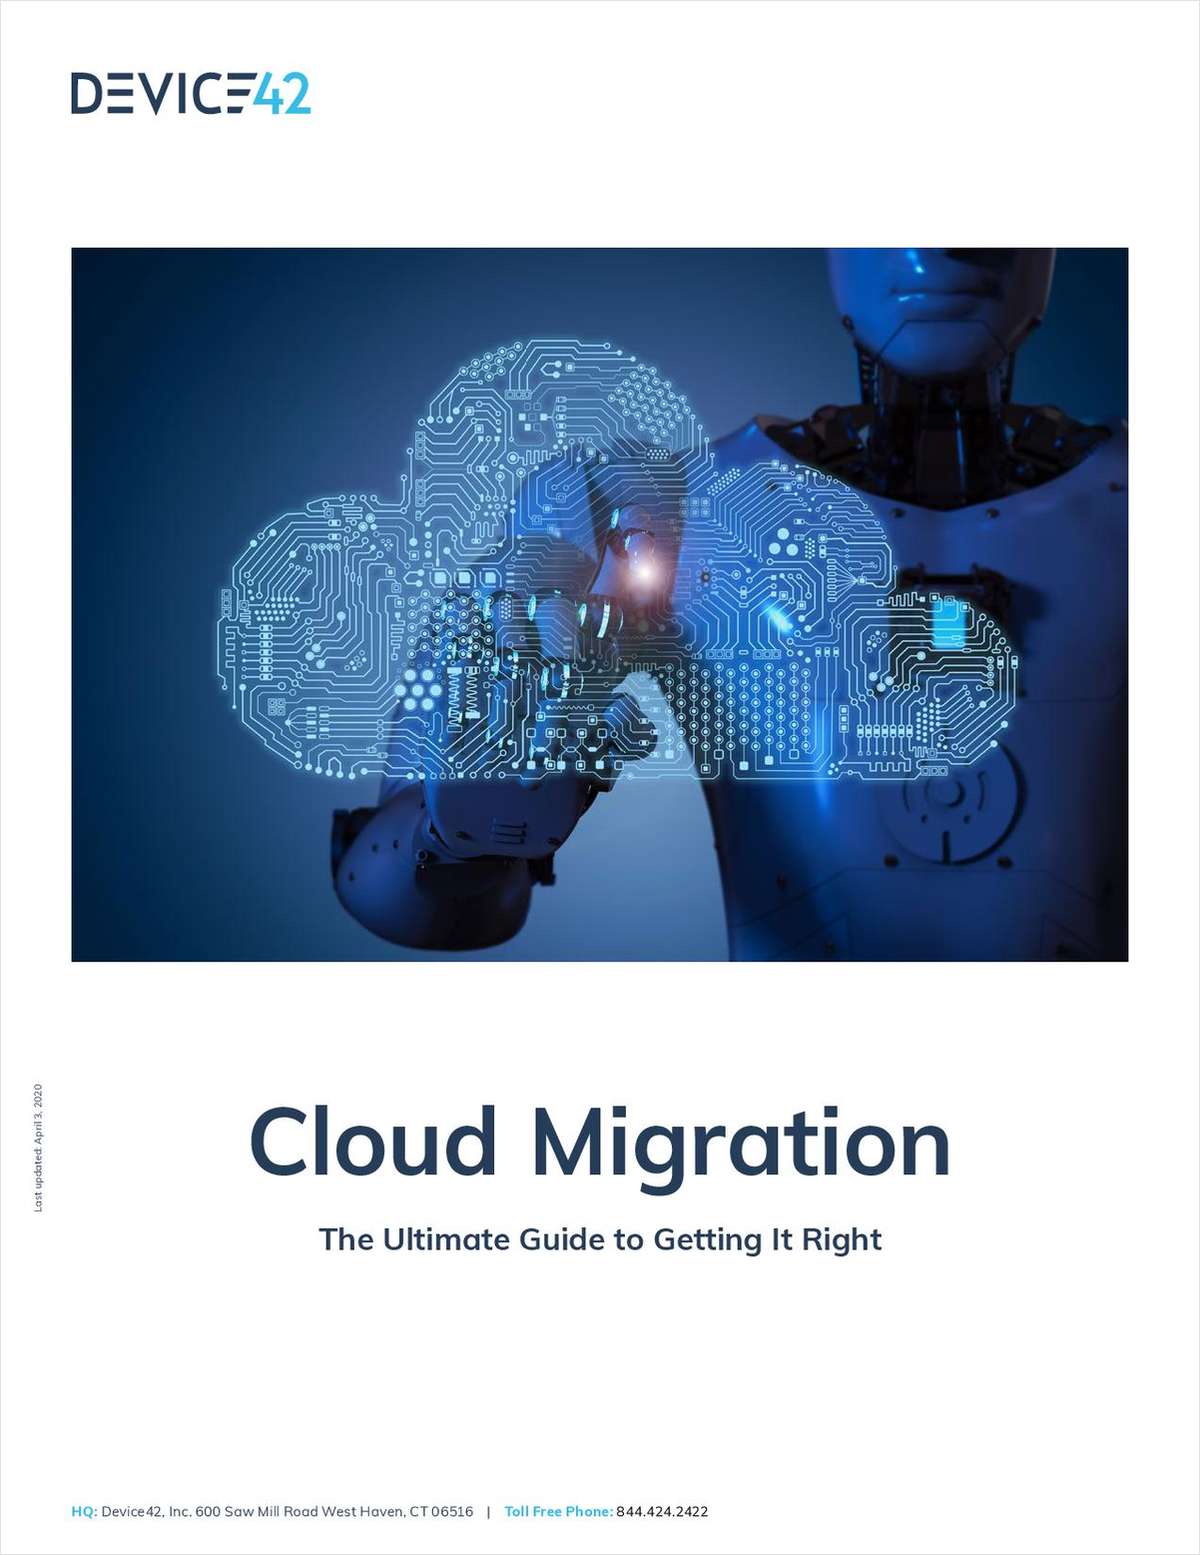 Cloud Migration: The Ultimate Guide to Getting it Right